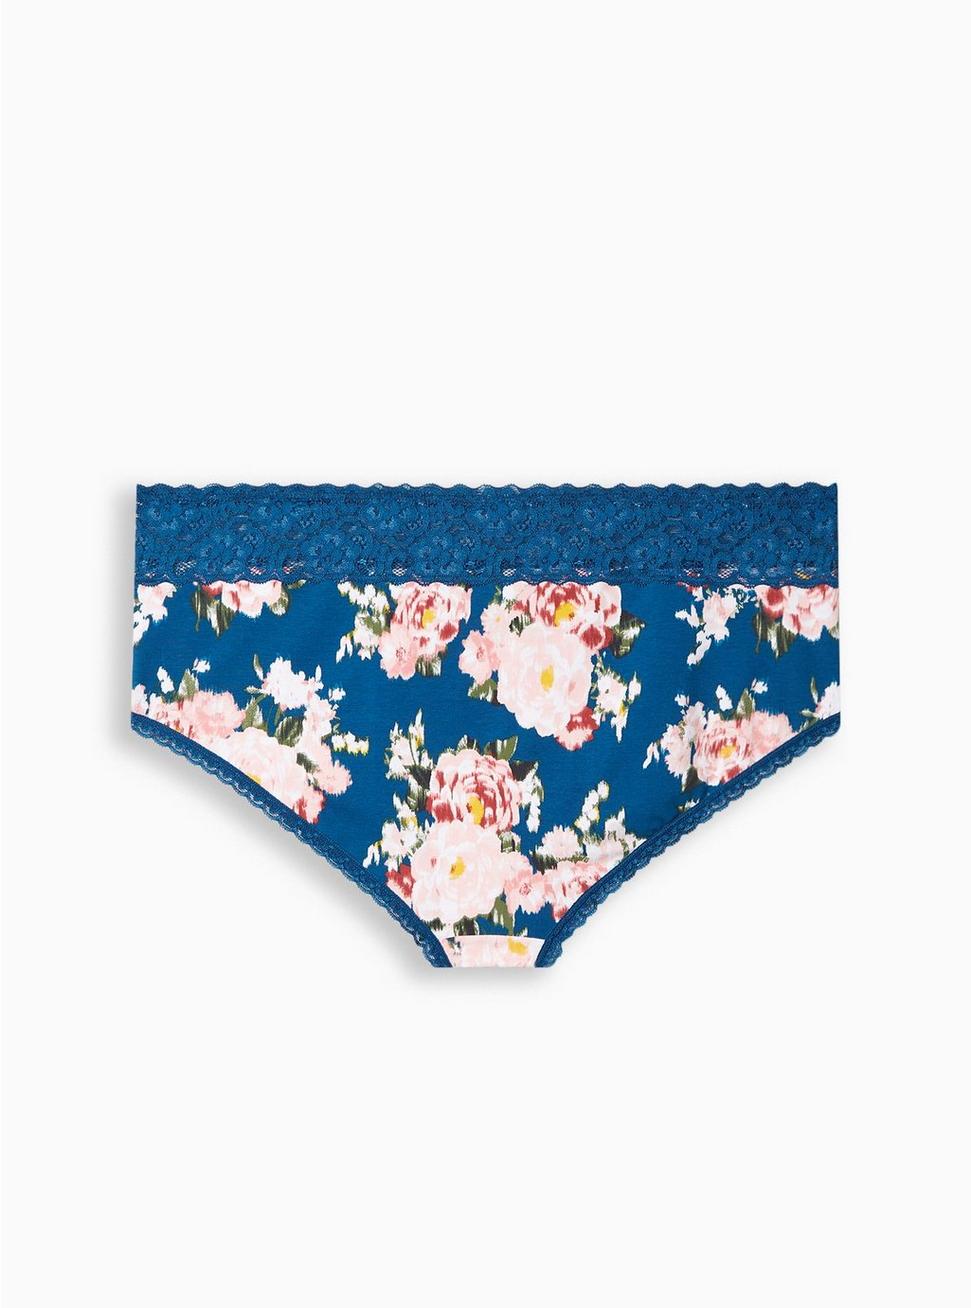 Cotton Mid-Rise Cheeky Lace Trim Panty, NICE IKAT FLORAL BLUE, alternate